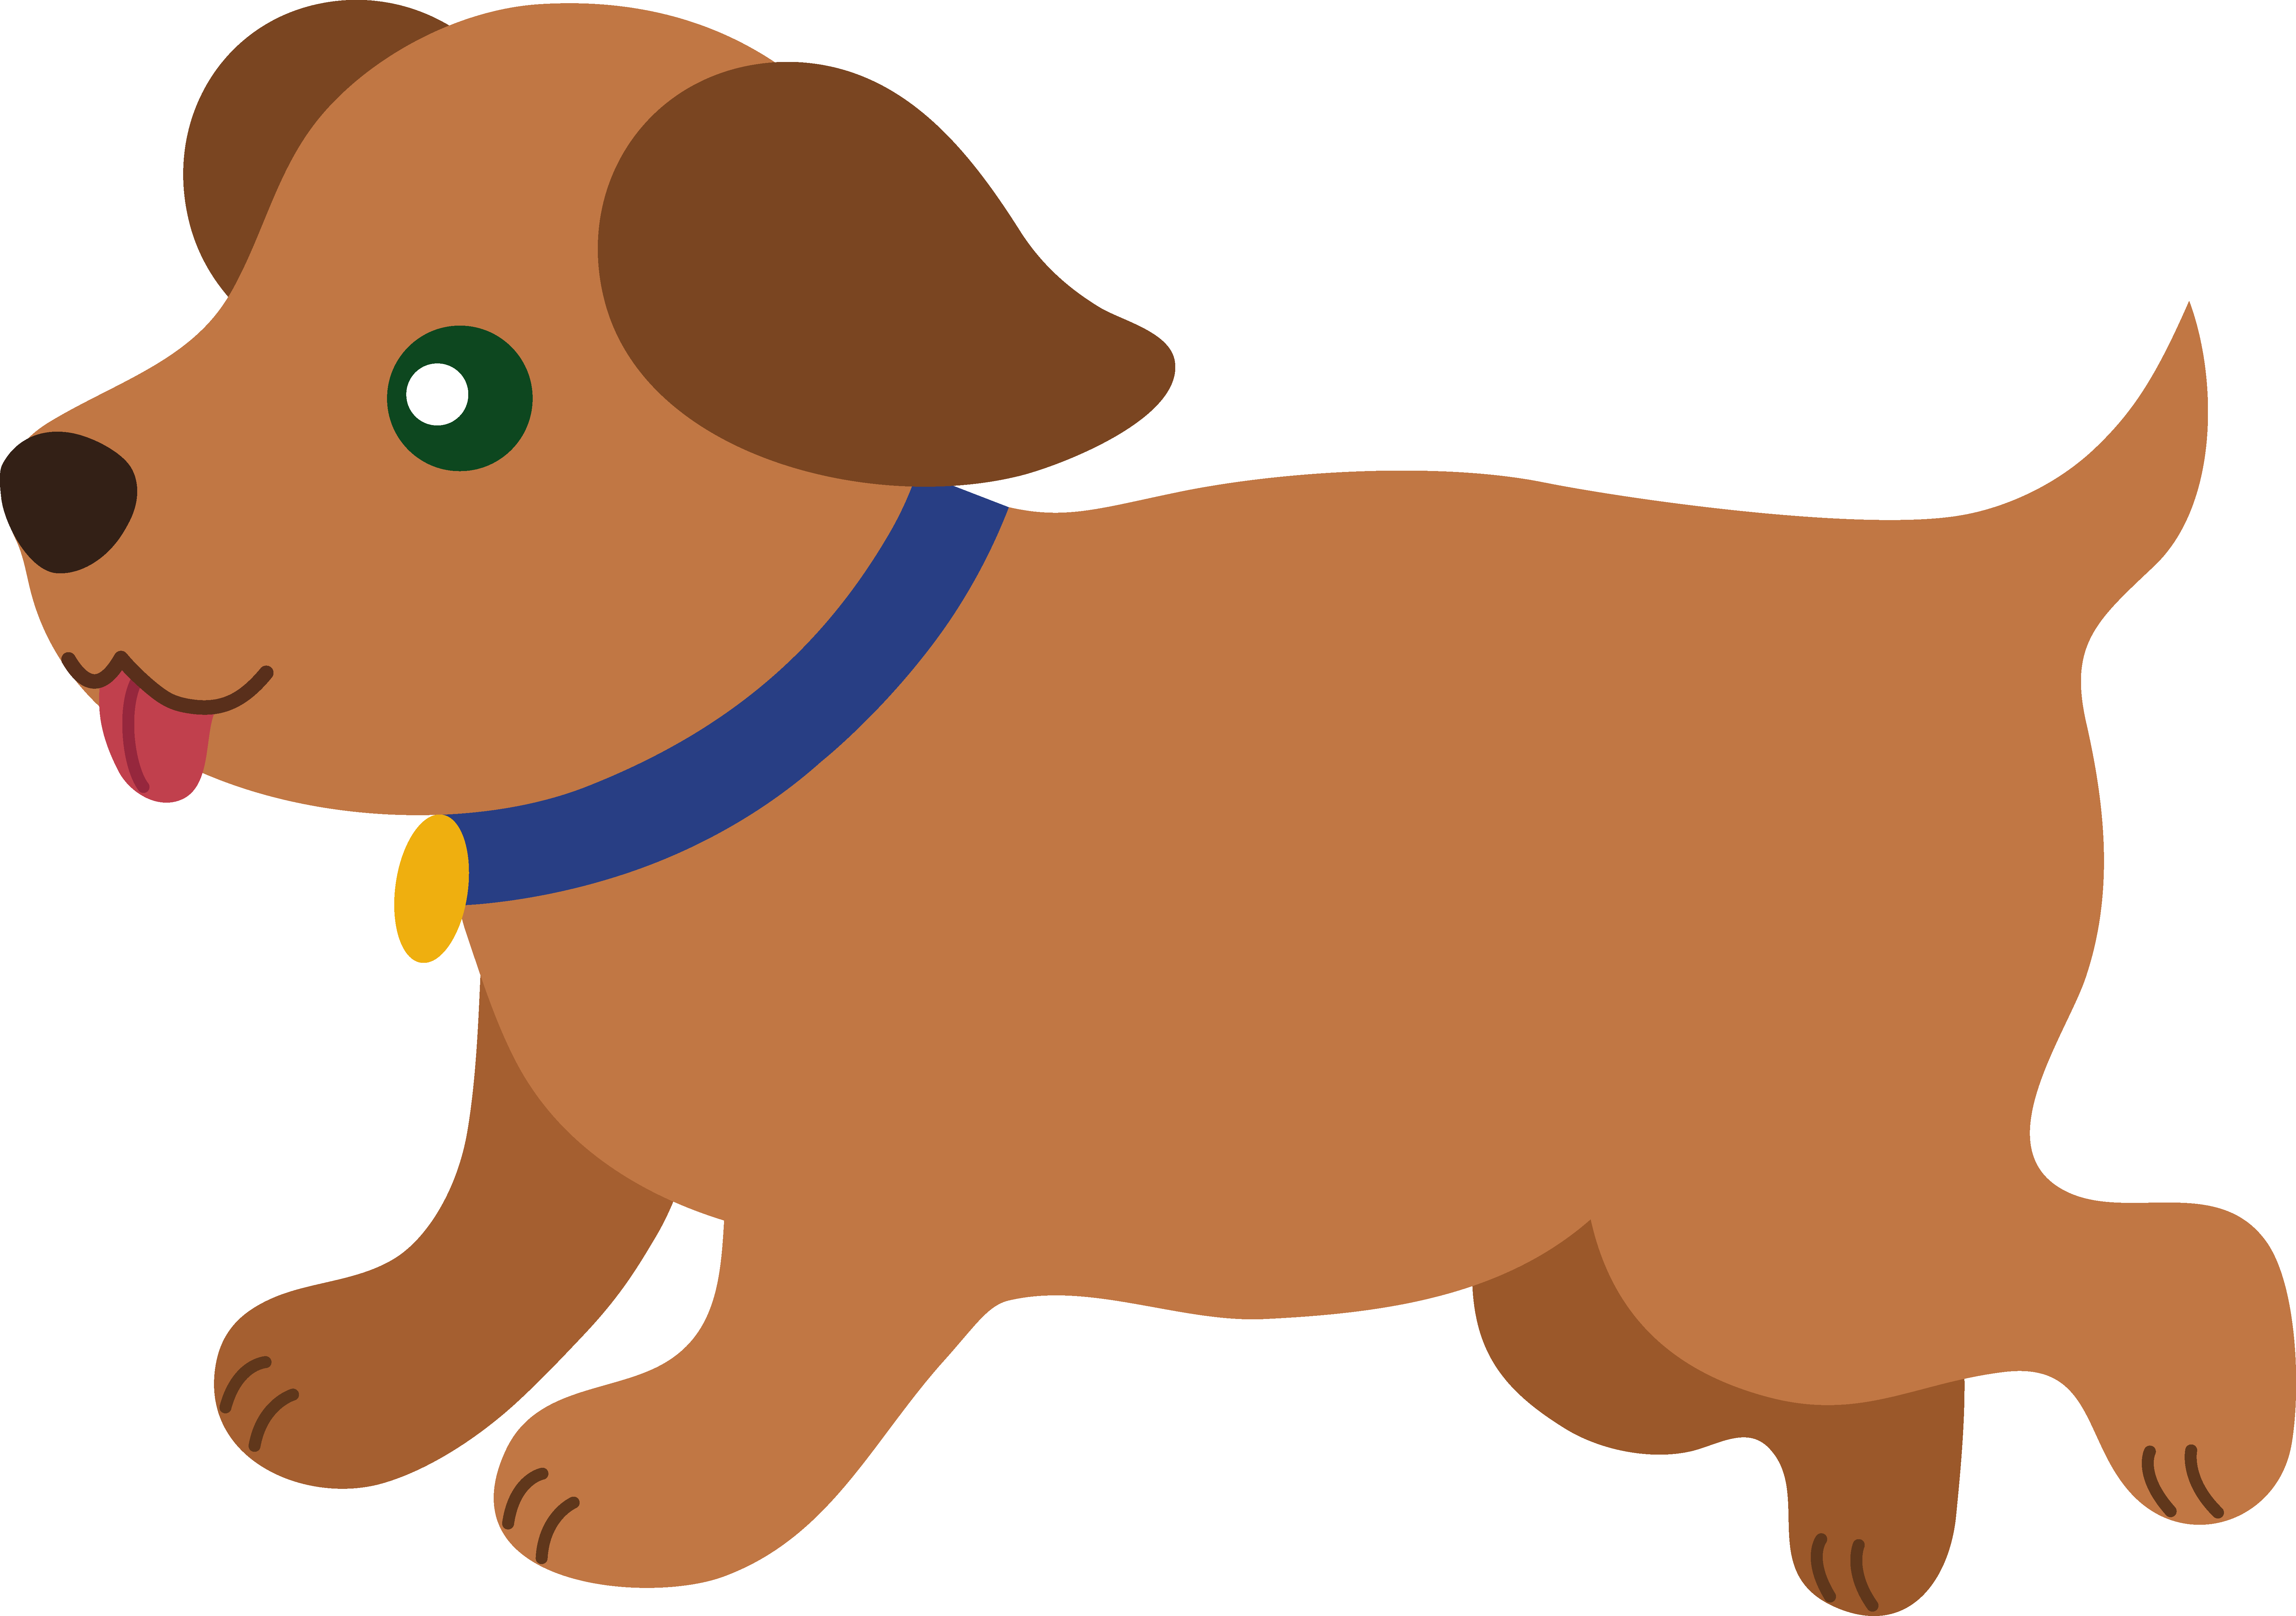 Puppy cliparts - Clipart Puppy